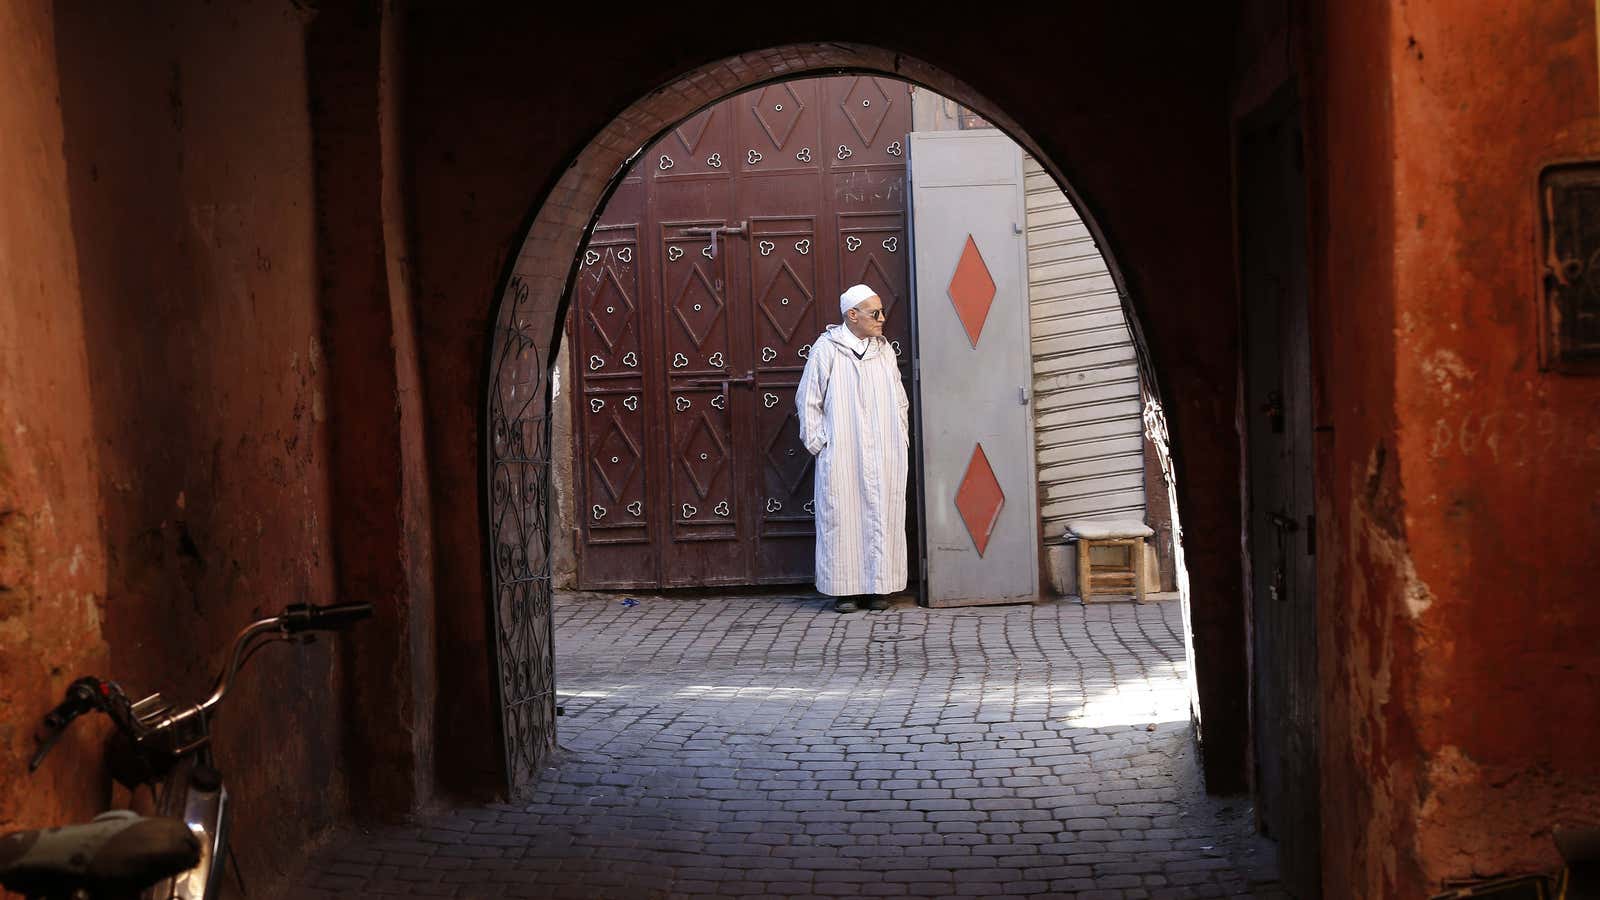 Marrakech is one of Airbnb’s most popular destinations